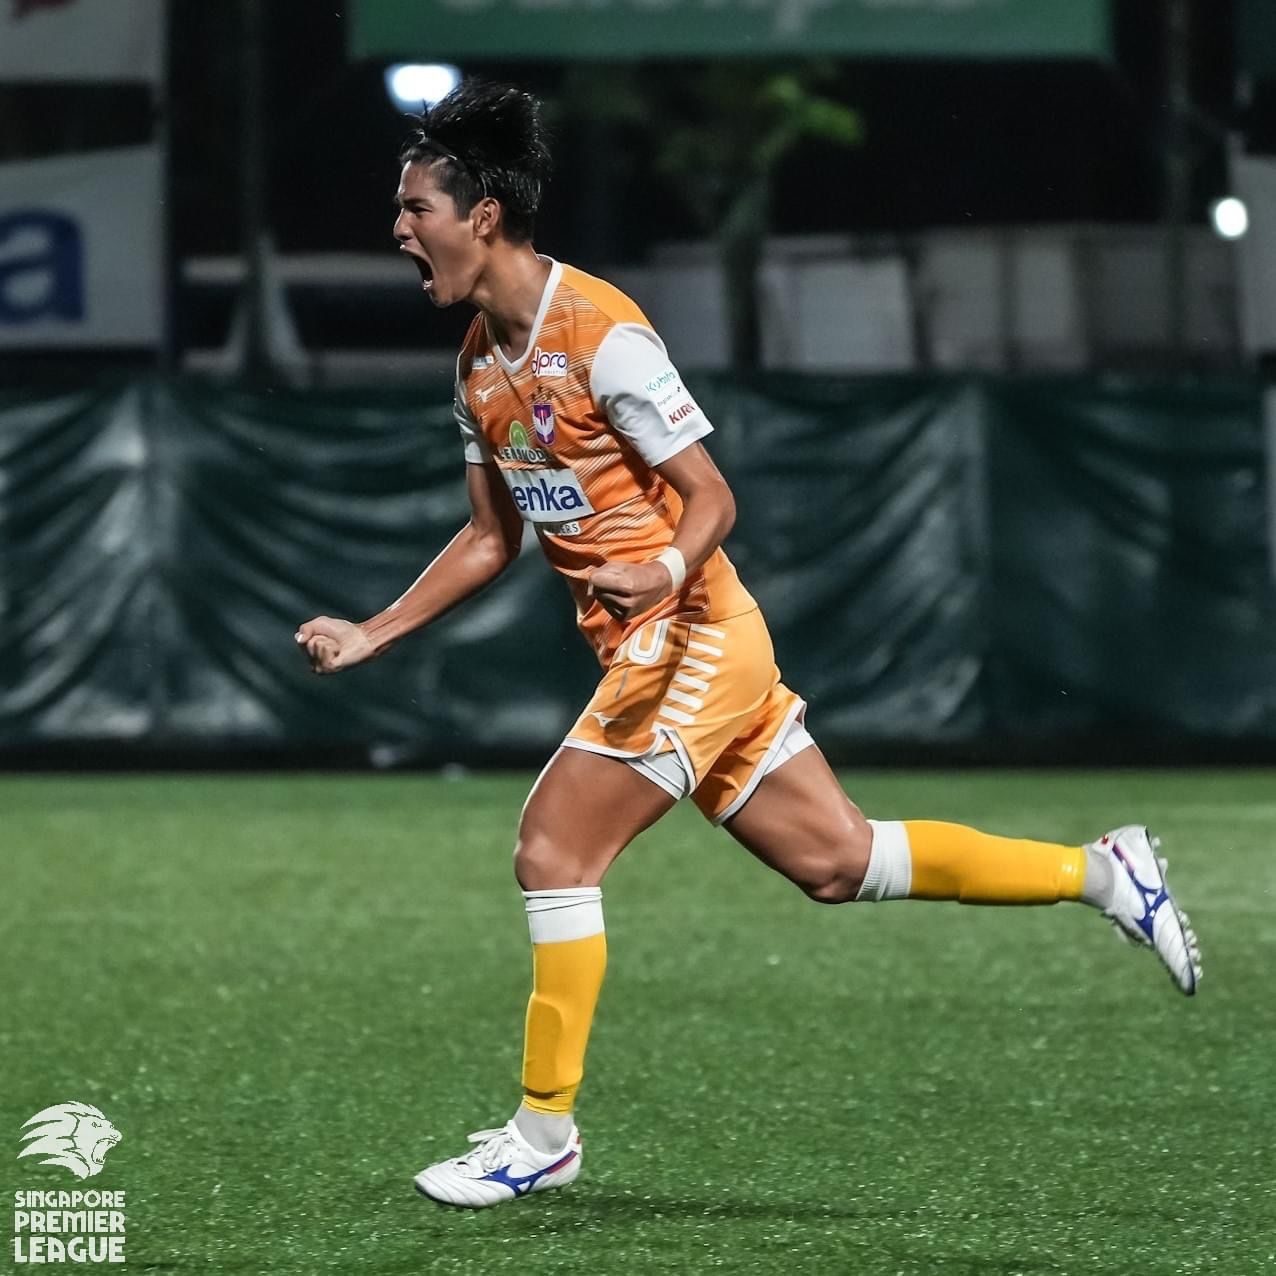 Albirex Niigata vs Young Lions Predictions, Betting Tips & Odds | 10 SEPTEMBER, 2022